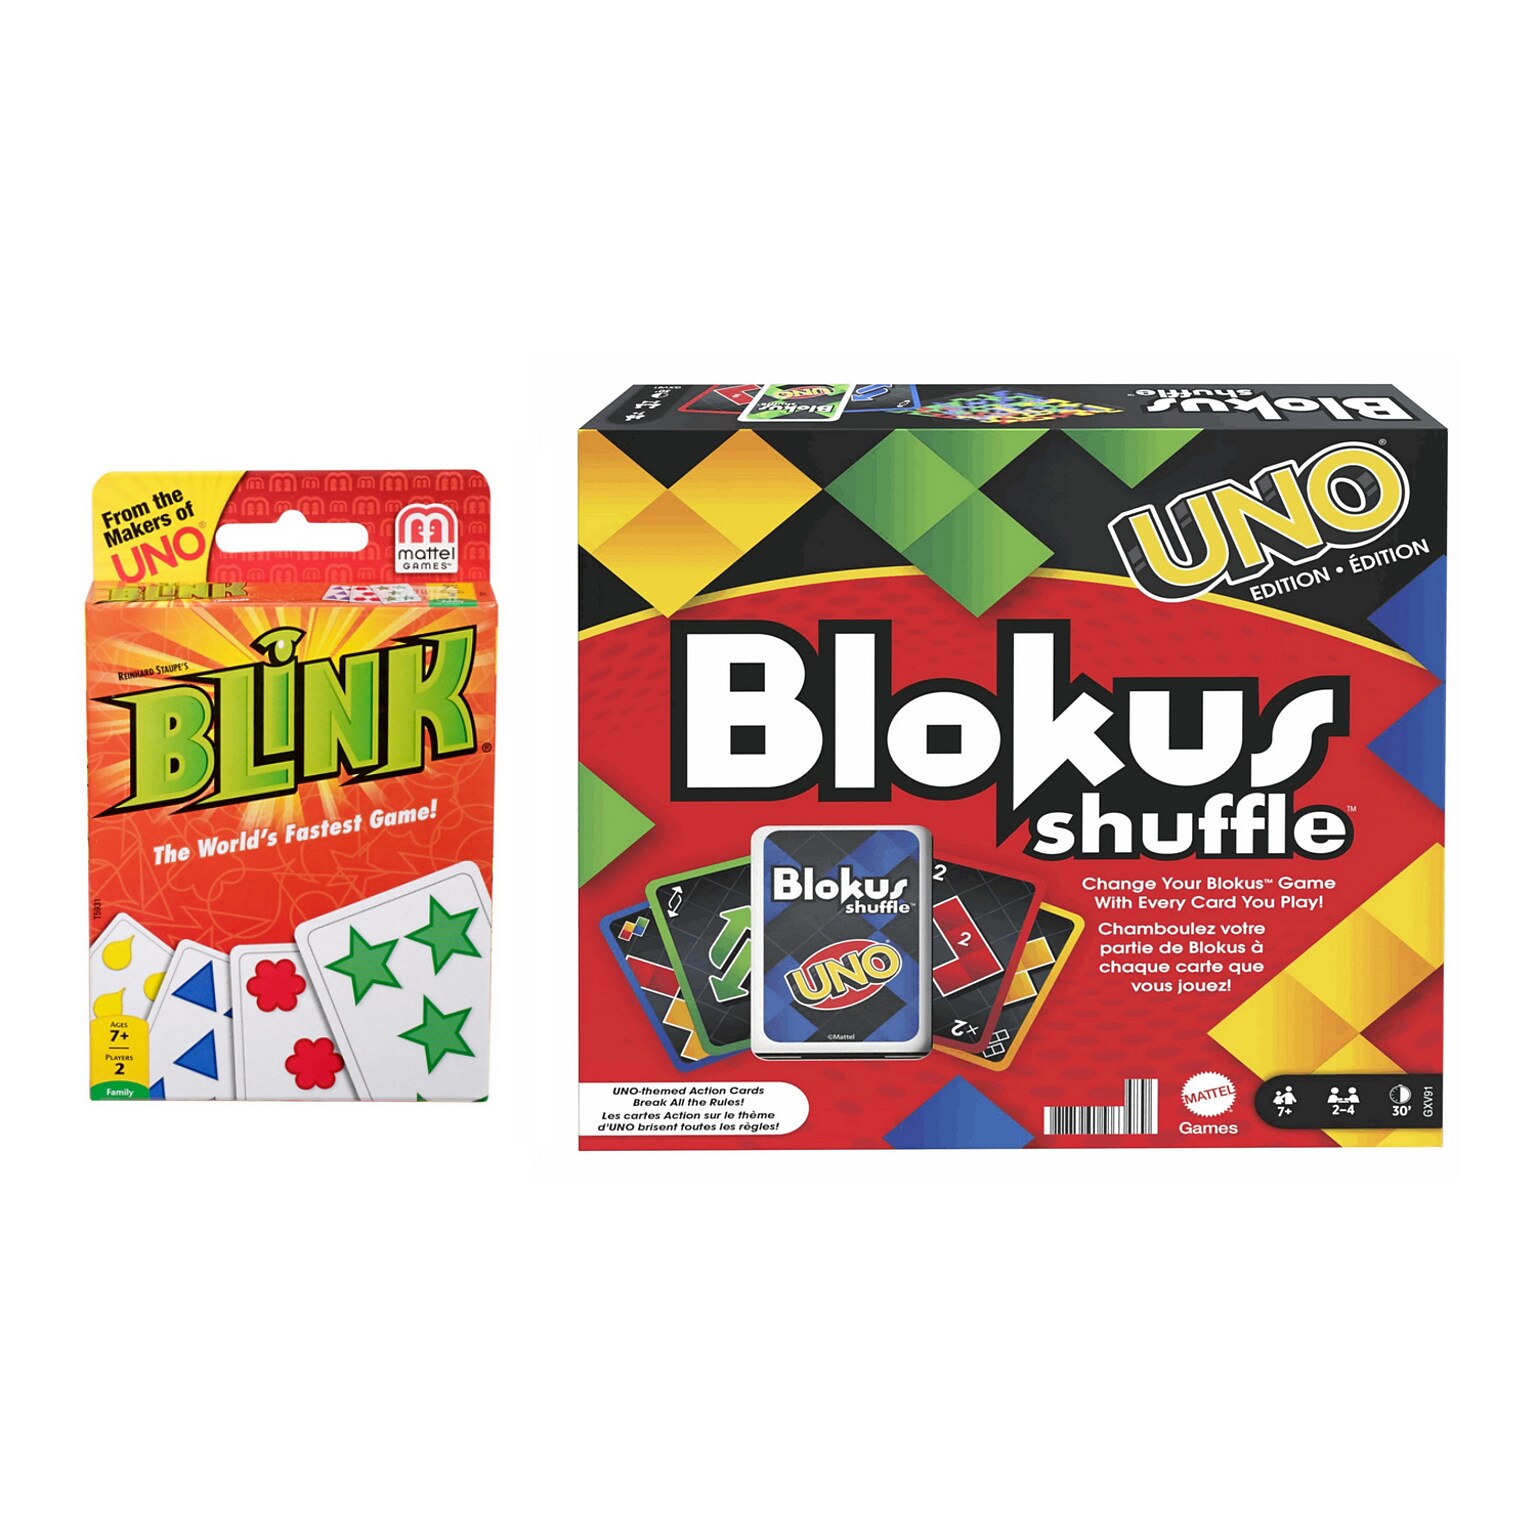 Mattel Game Set: Blink Card Game The Worlds Fastest Game! and Blokus Shuffle: UNO Edition